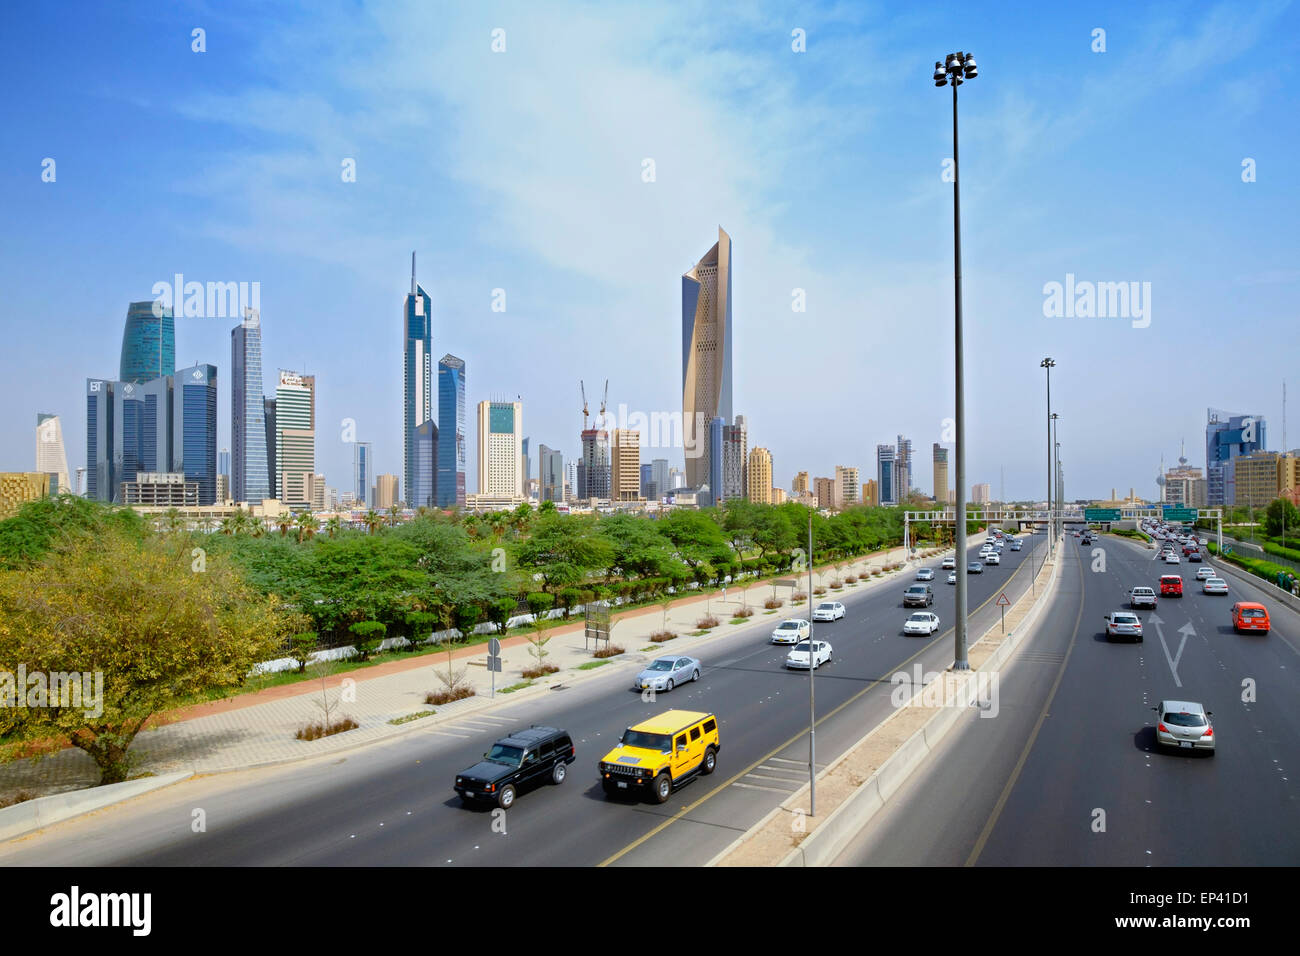 Skyline of Central Business District (CBD)  and First Ring Road motorway in Kuwait City, Kuwait Stock Photo